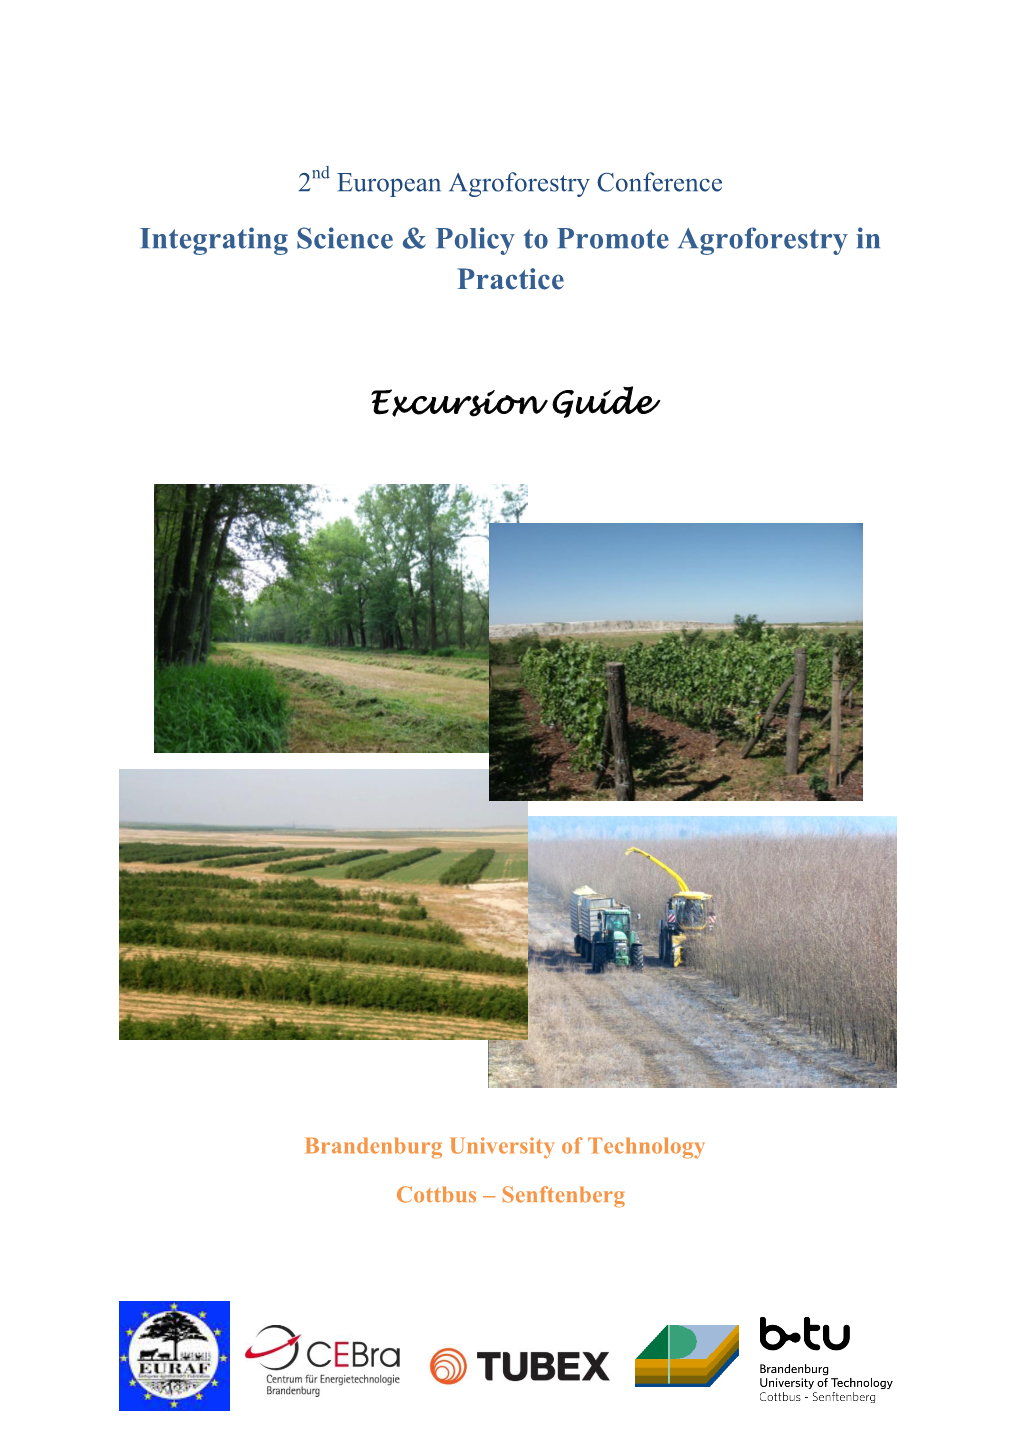 Integrating Science & Policy to Promote Agroforestry in Practice